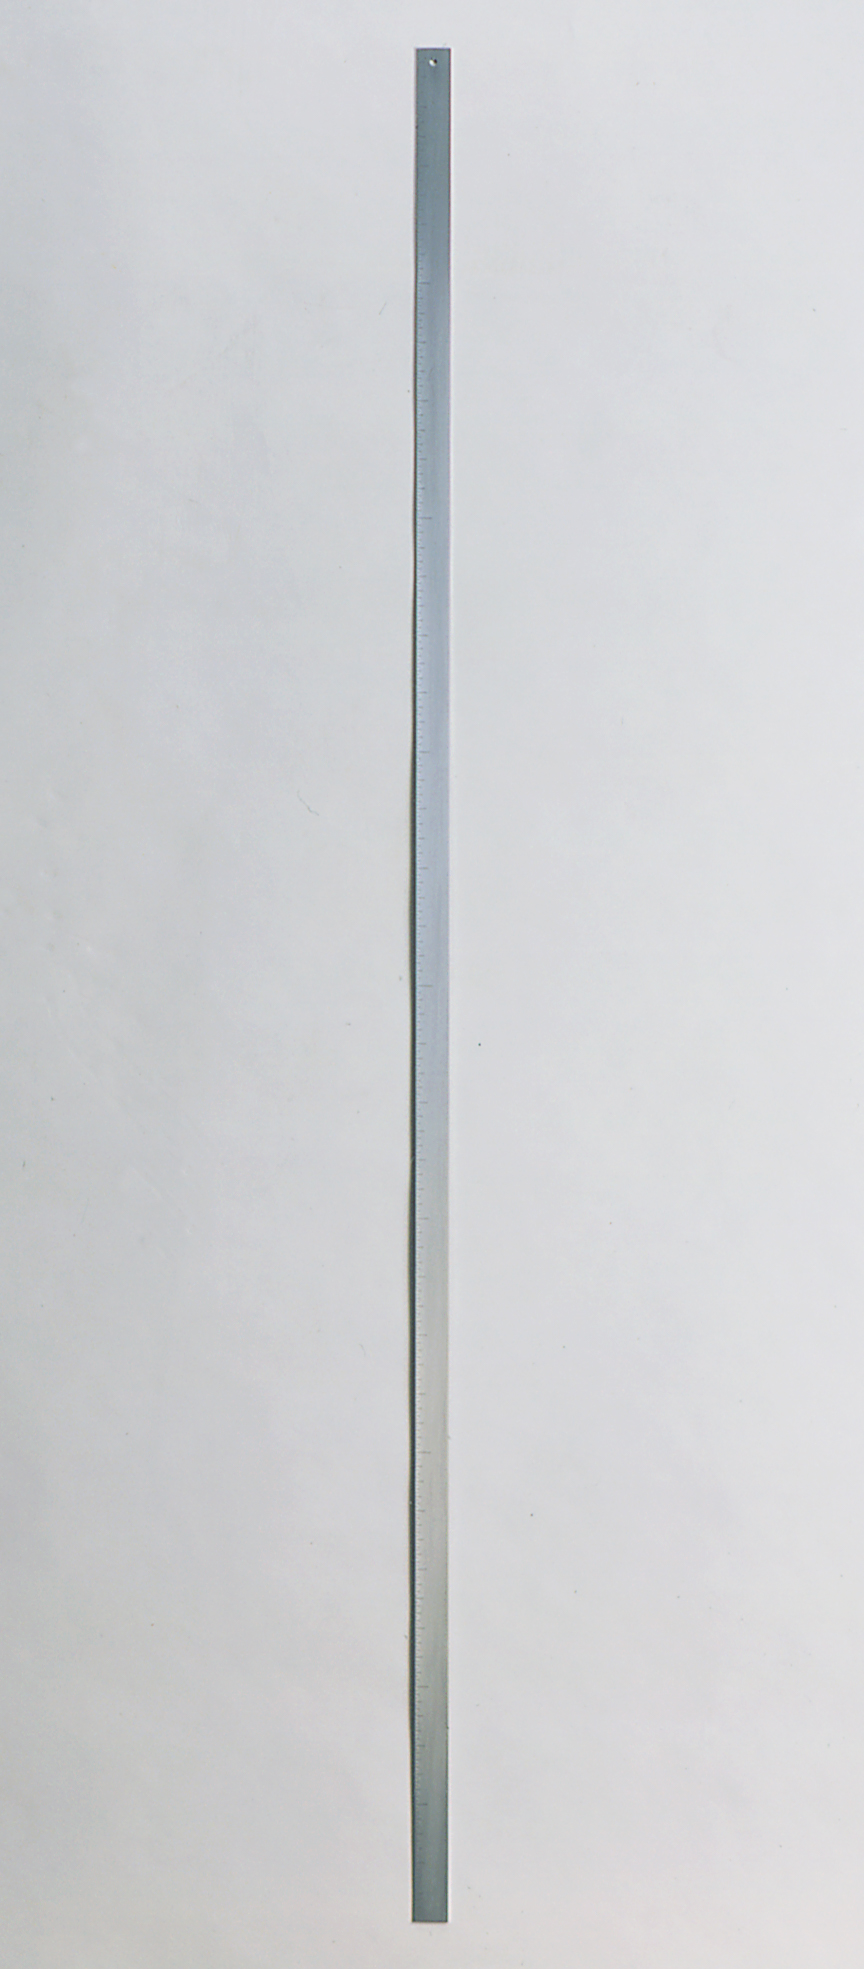 Image of wall hung "Measure XI" sculpture created from bandsawn aluminum